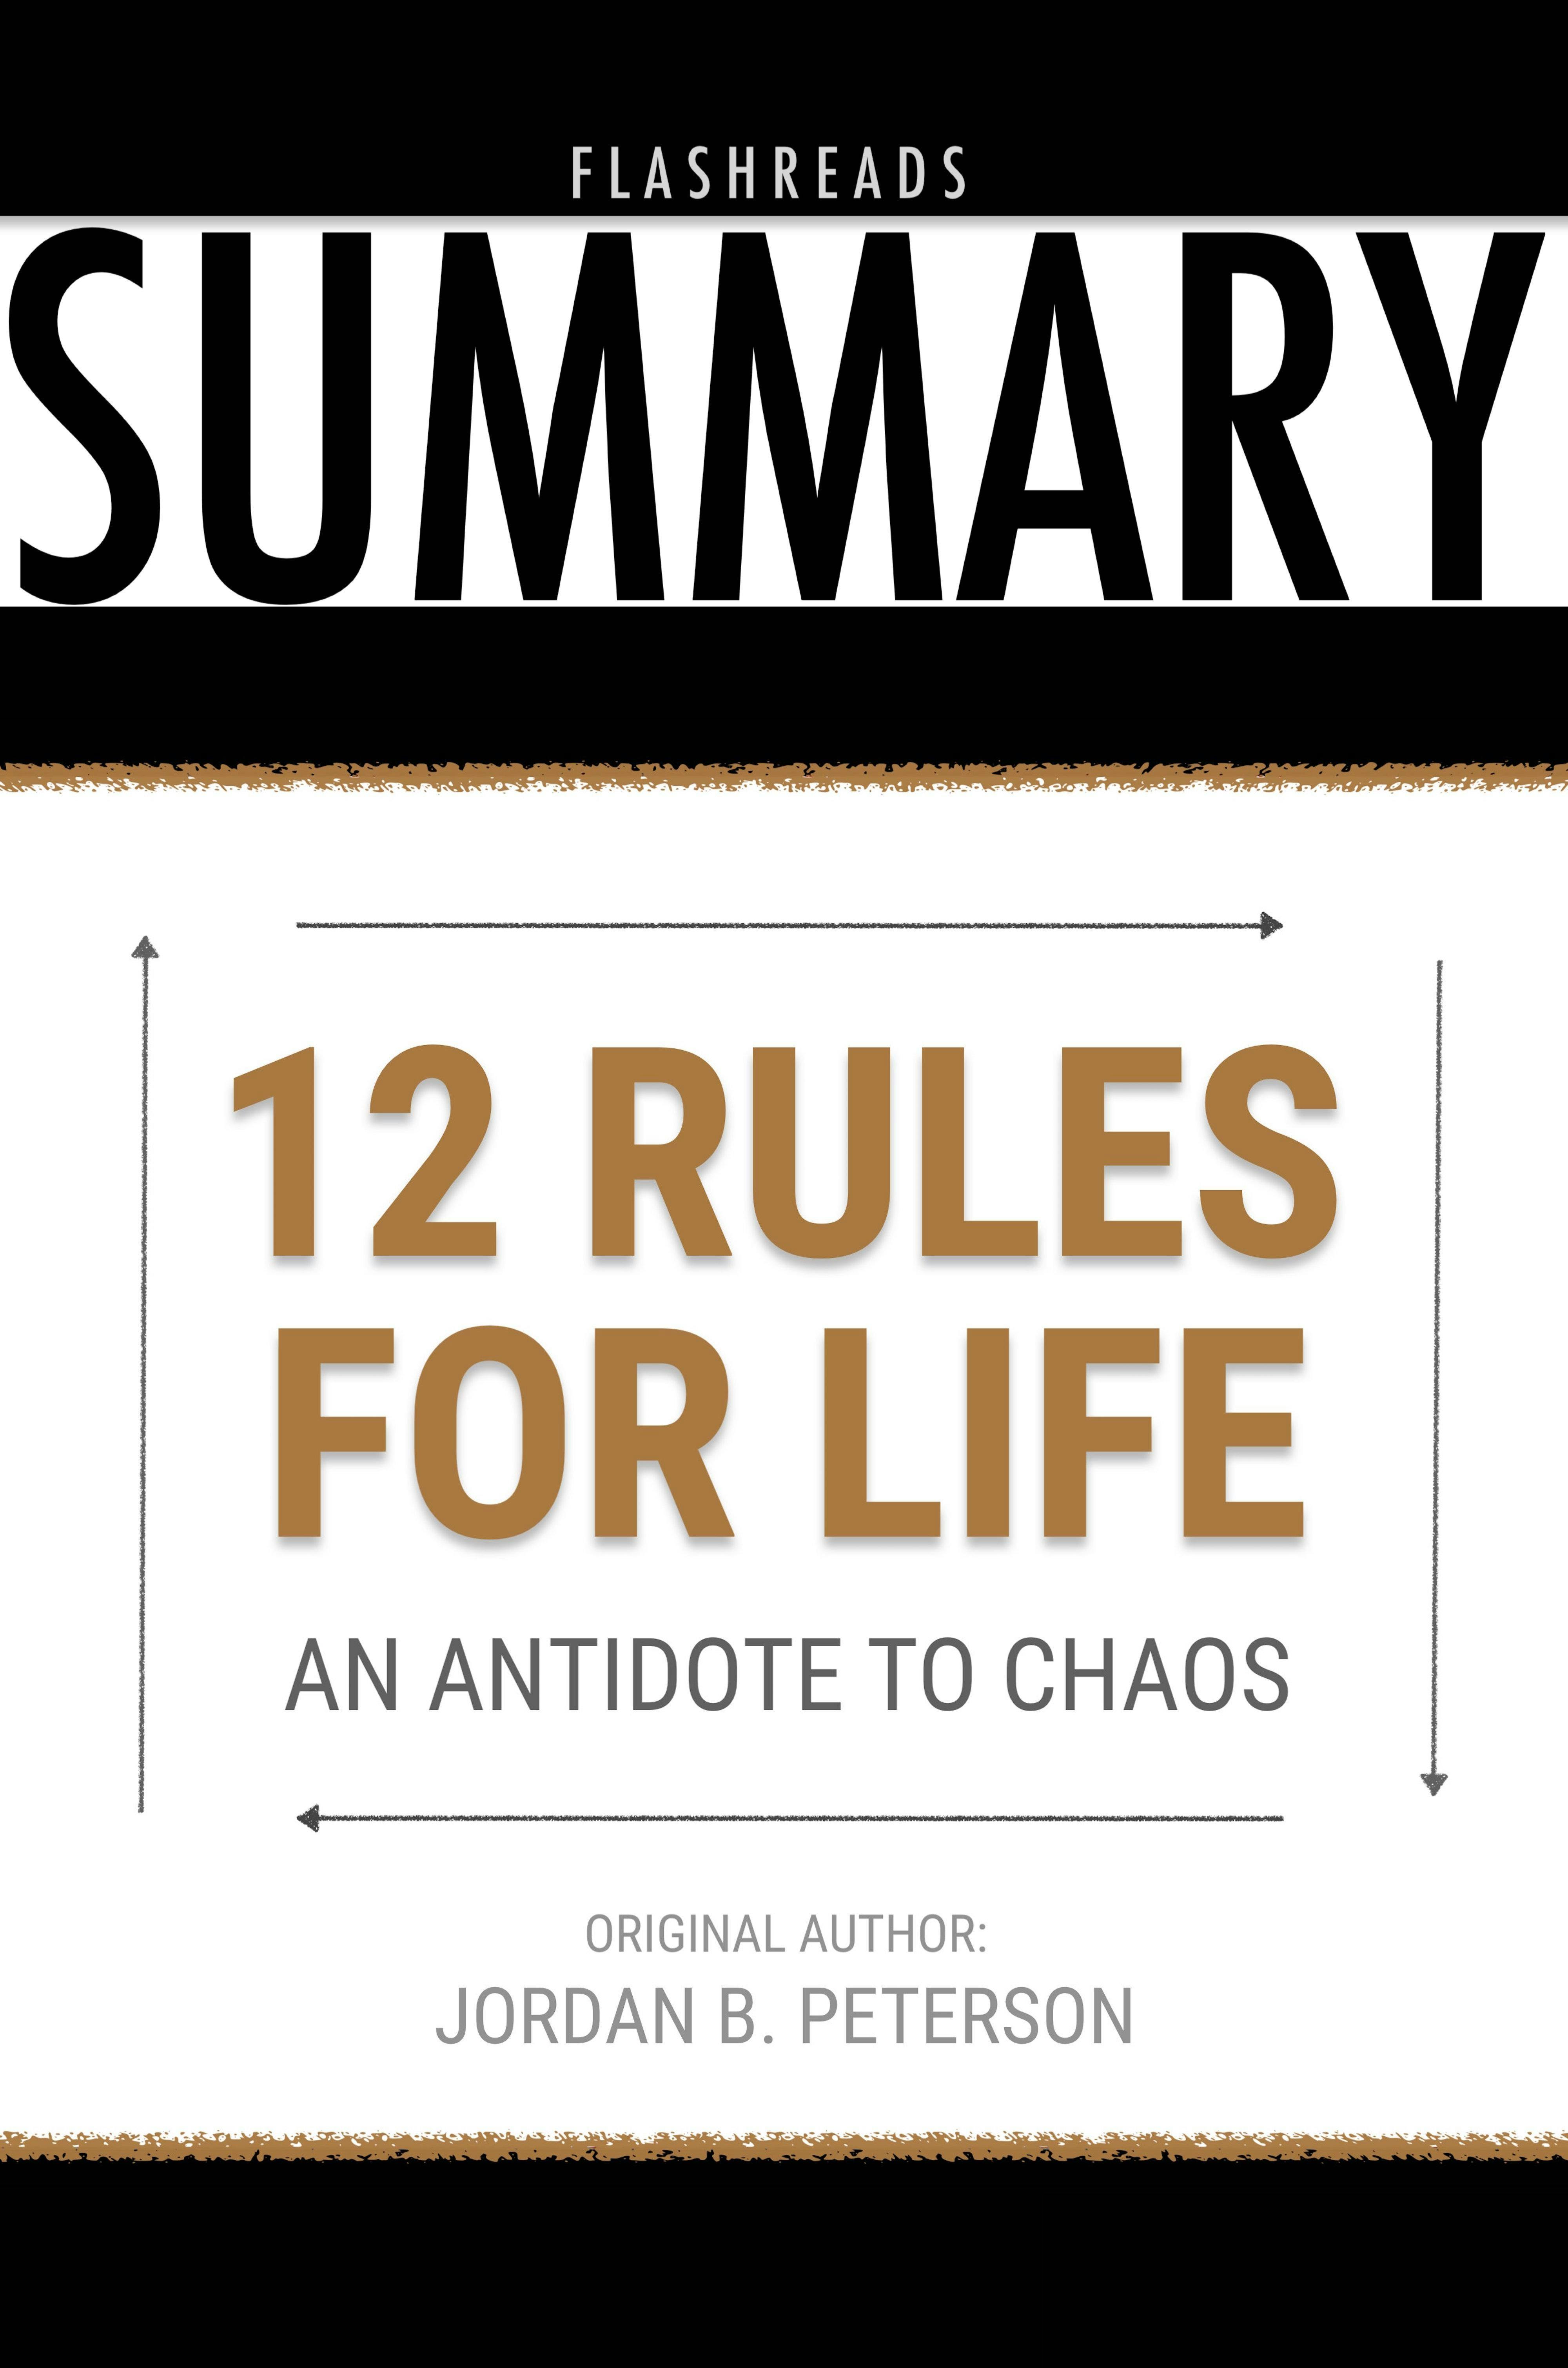 12 Rules for Life by Jordan B. Peterson - Book Summary: An Antidote to Chaos - Dean Bokhari, FlashBooks